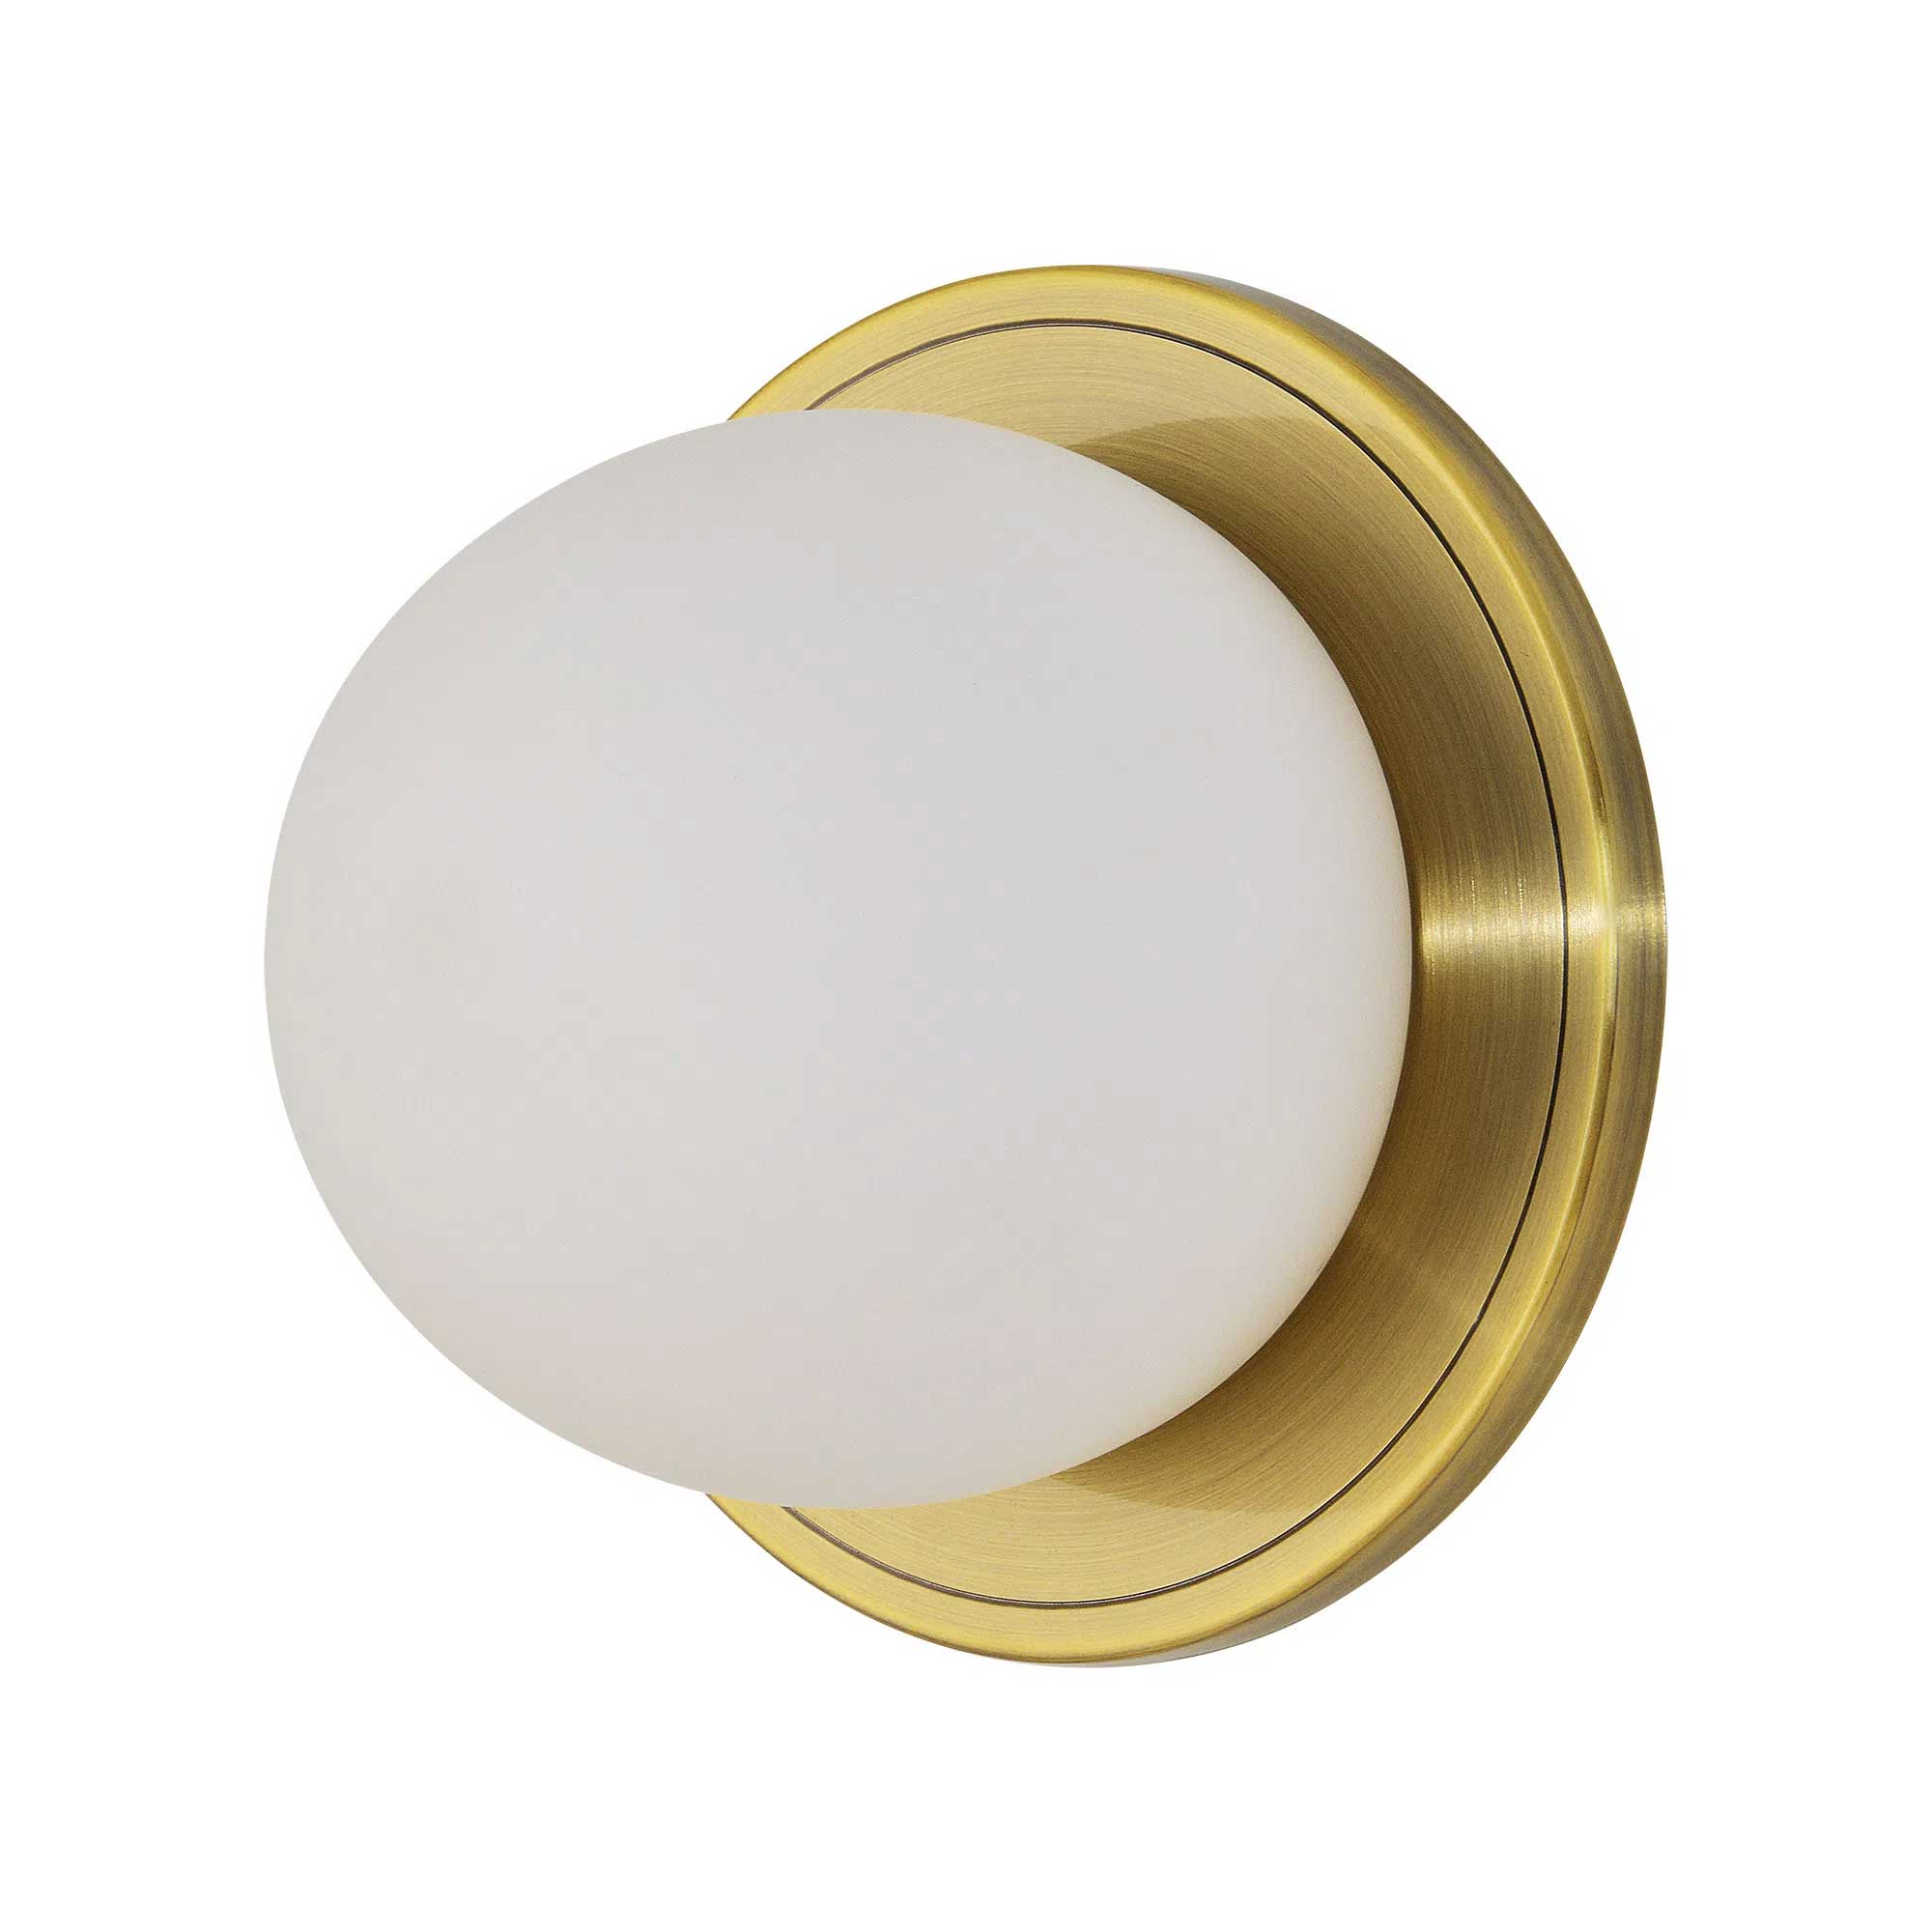 HUGO Wall sconce Gold - WS125 | RENWIL